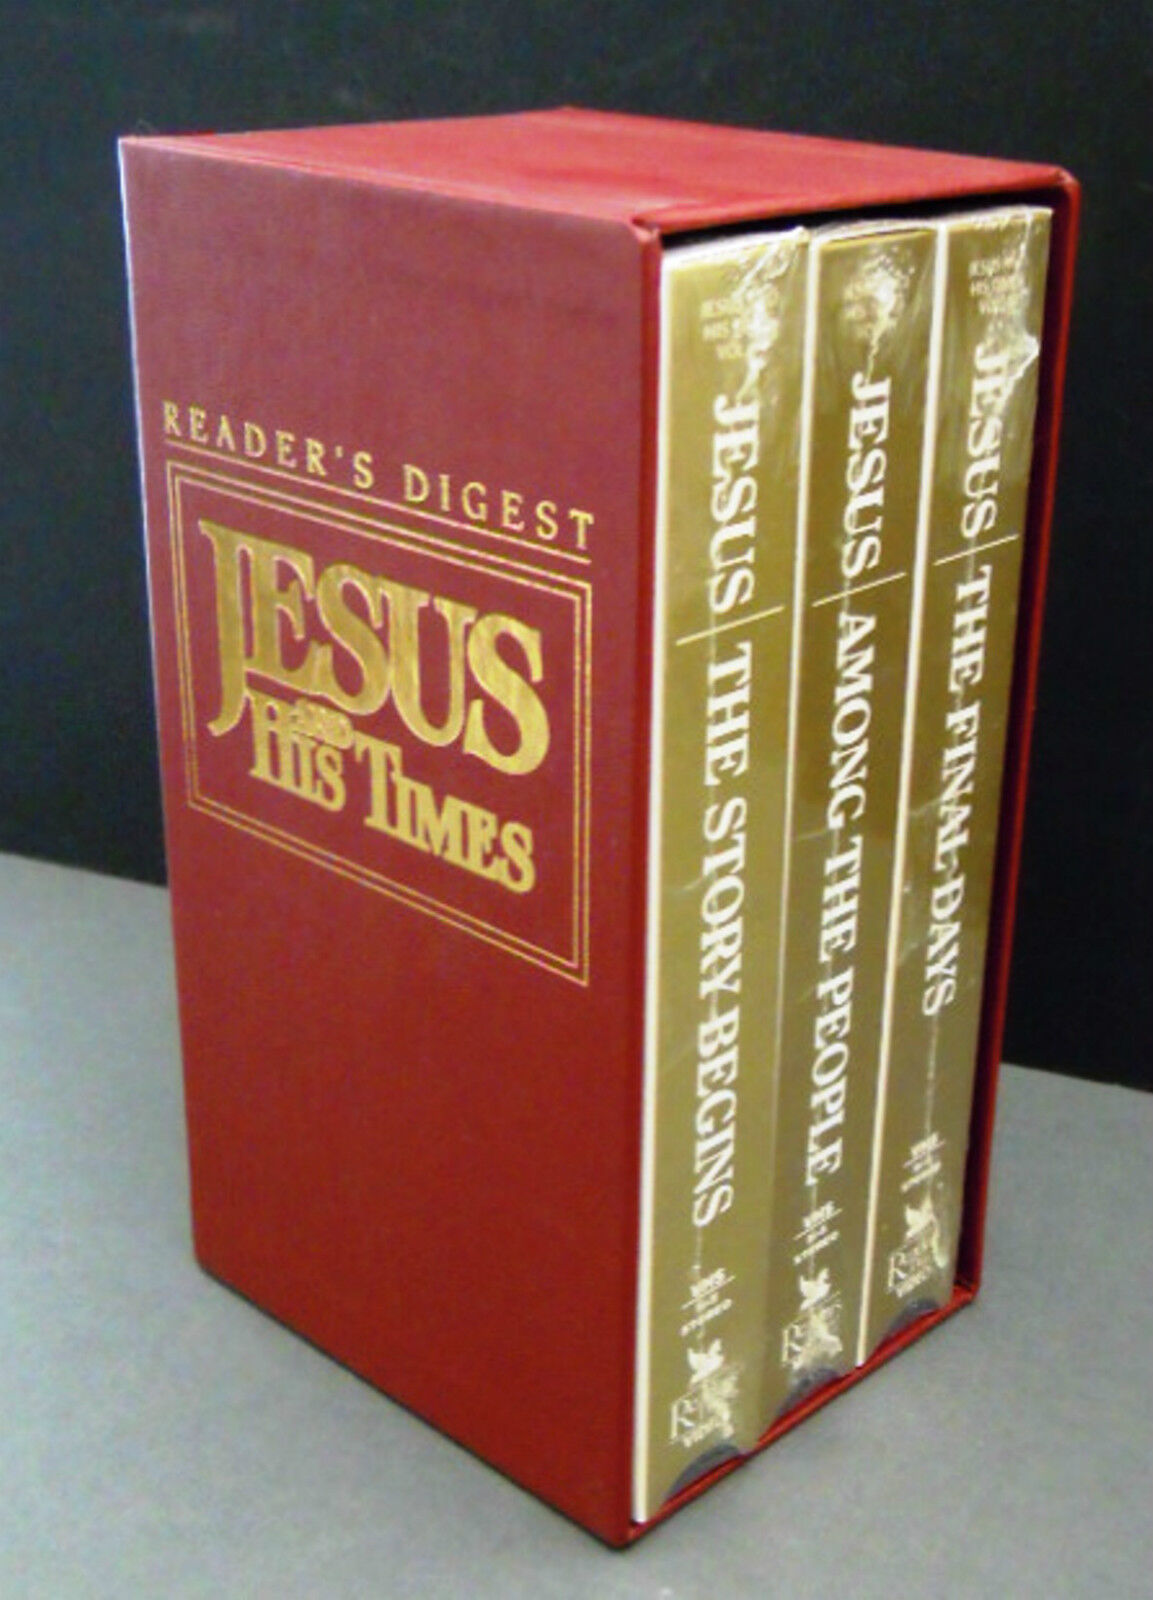 BOX SET 3 JESUS & HIS TIMES VHS Tapes 1991 Readers Digest FACTORY SEALED + Guide